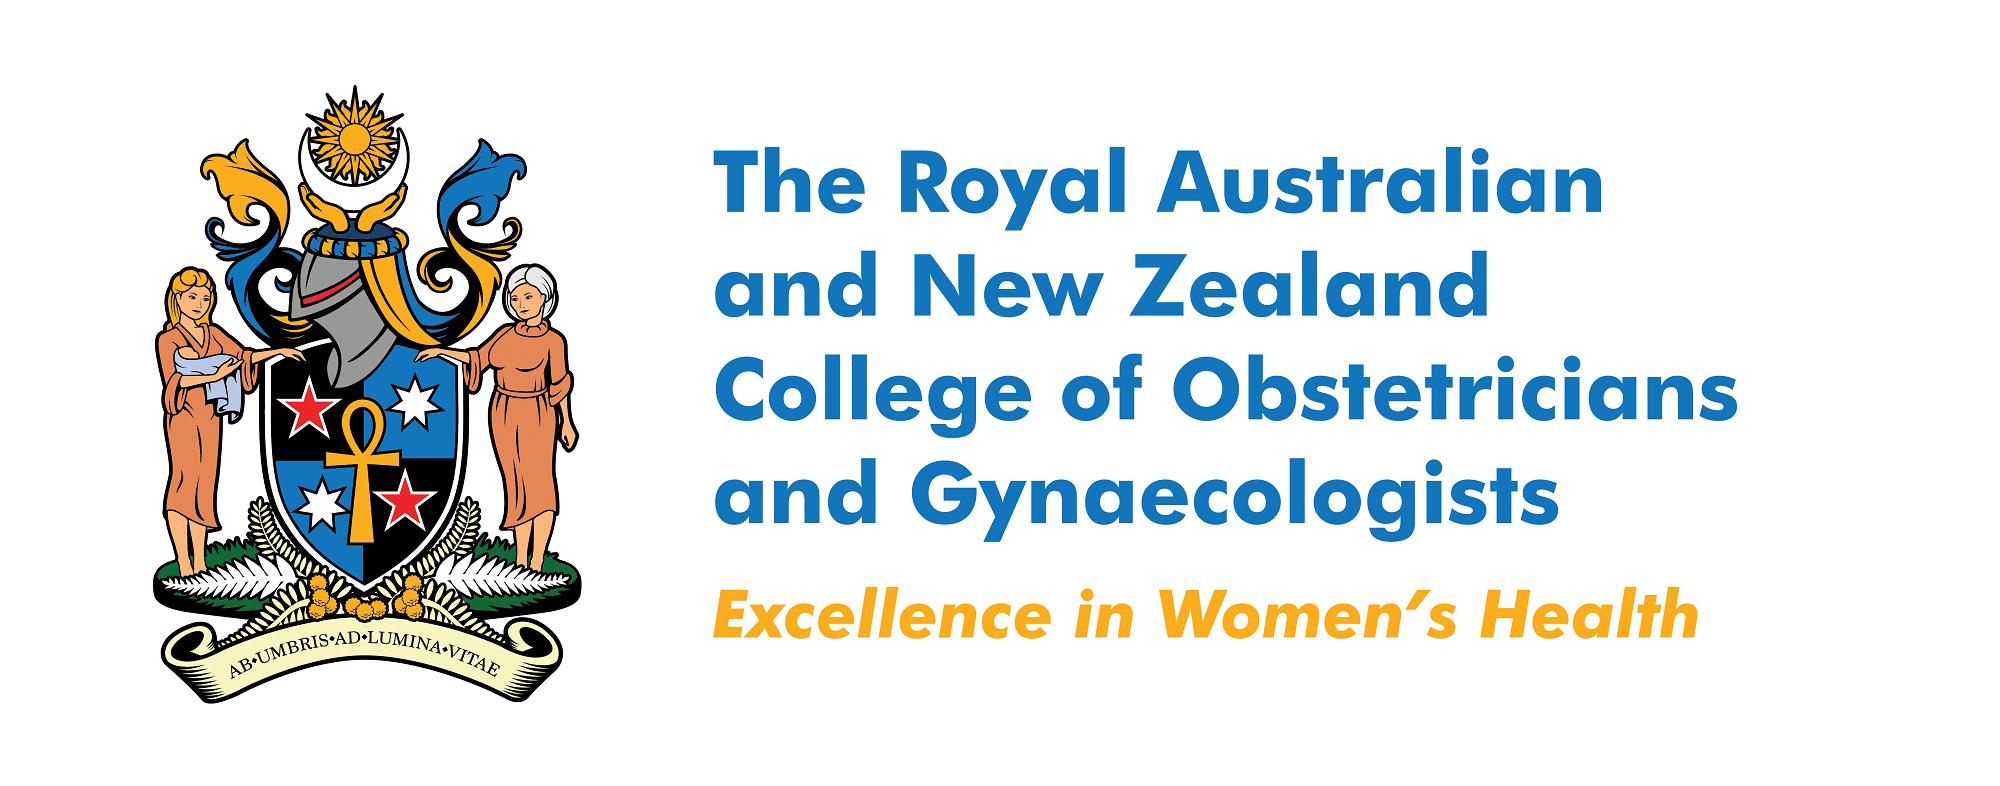 Logo of The Royal Australian and New Zealand College of Obstetricians and Gynaecologists (RANZCOG)